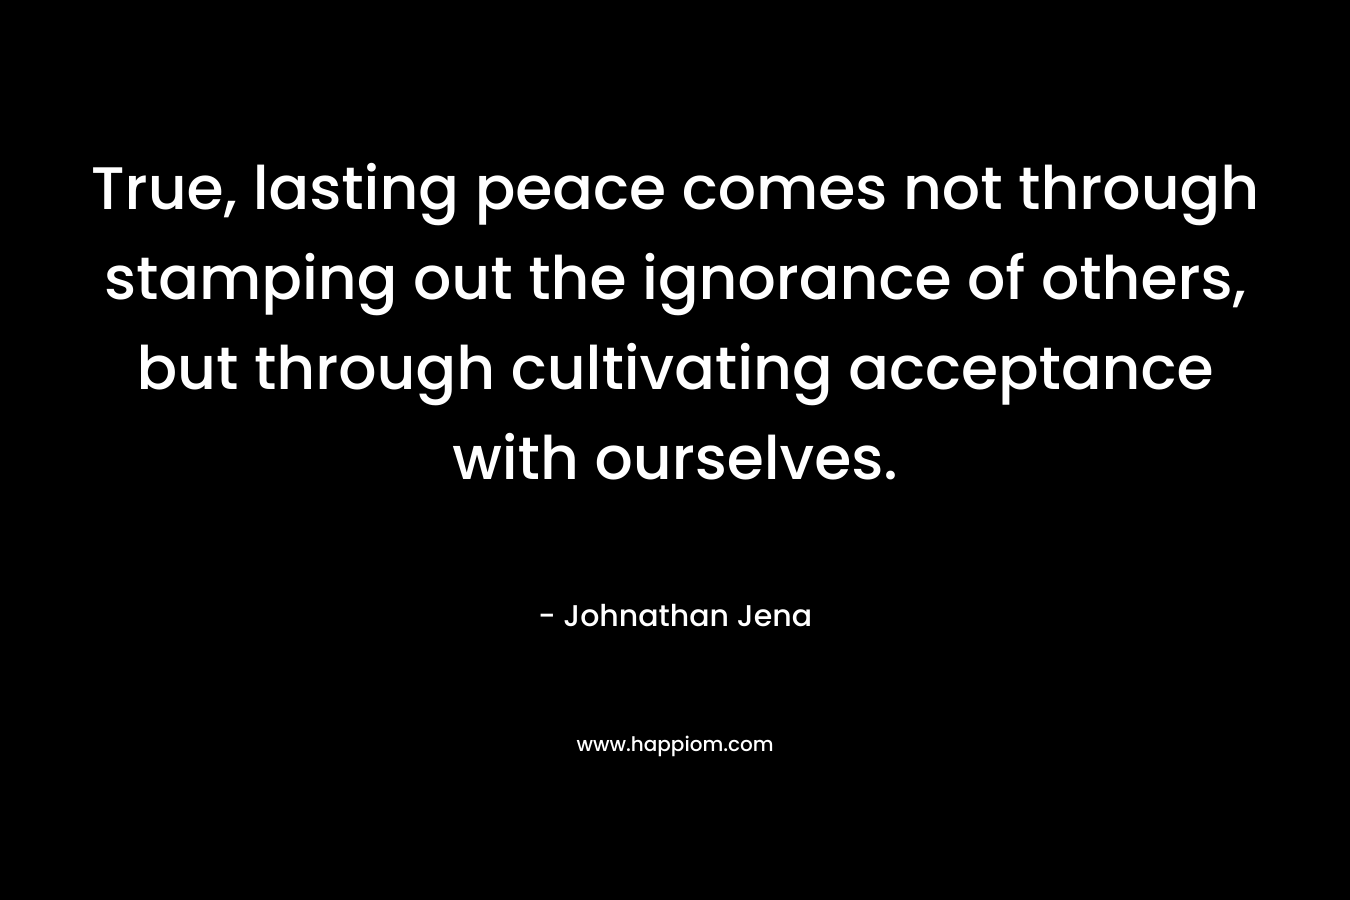 True, lasting peace comes not through stamping out the ignorance of others, but through cultivating acceptance with ourselves. – Johnathan Jena